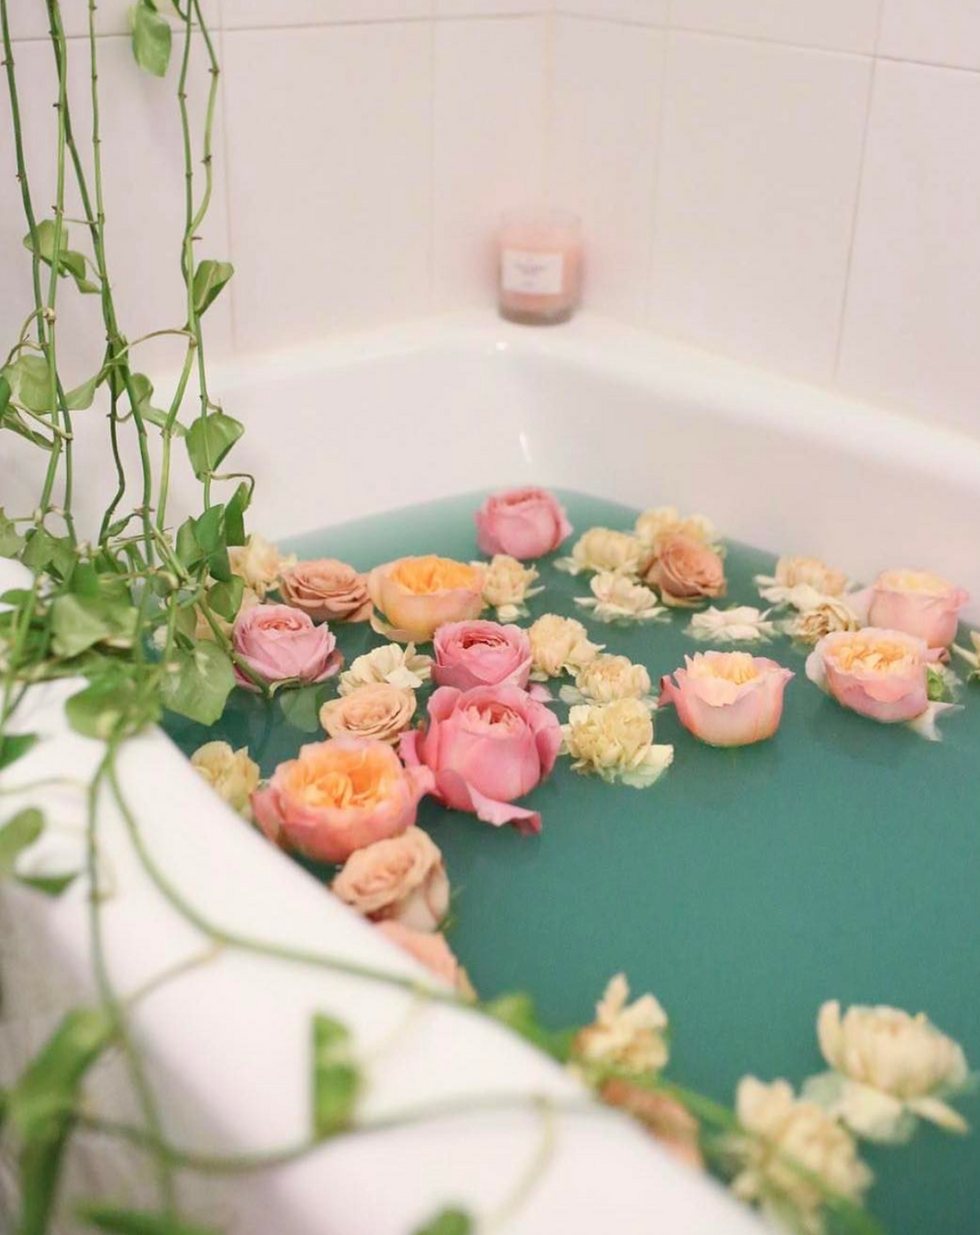 25 Things You Can Do On Your Self-Care Sundays